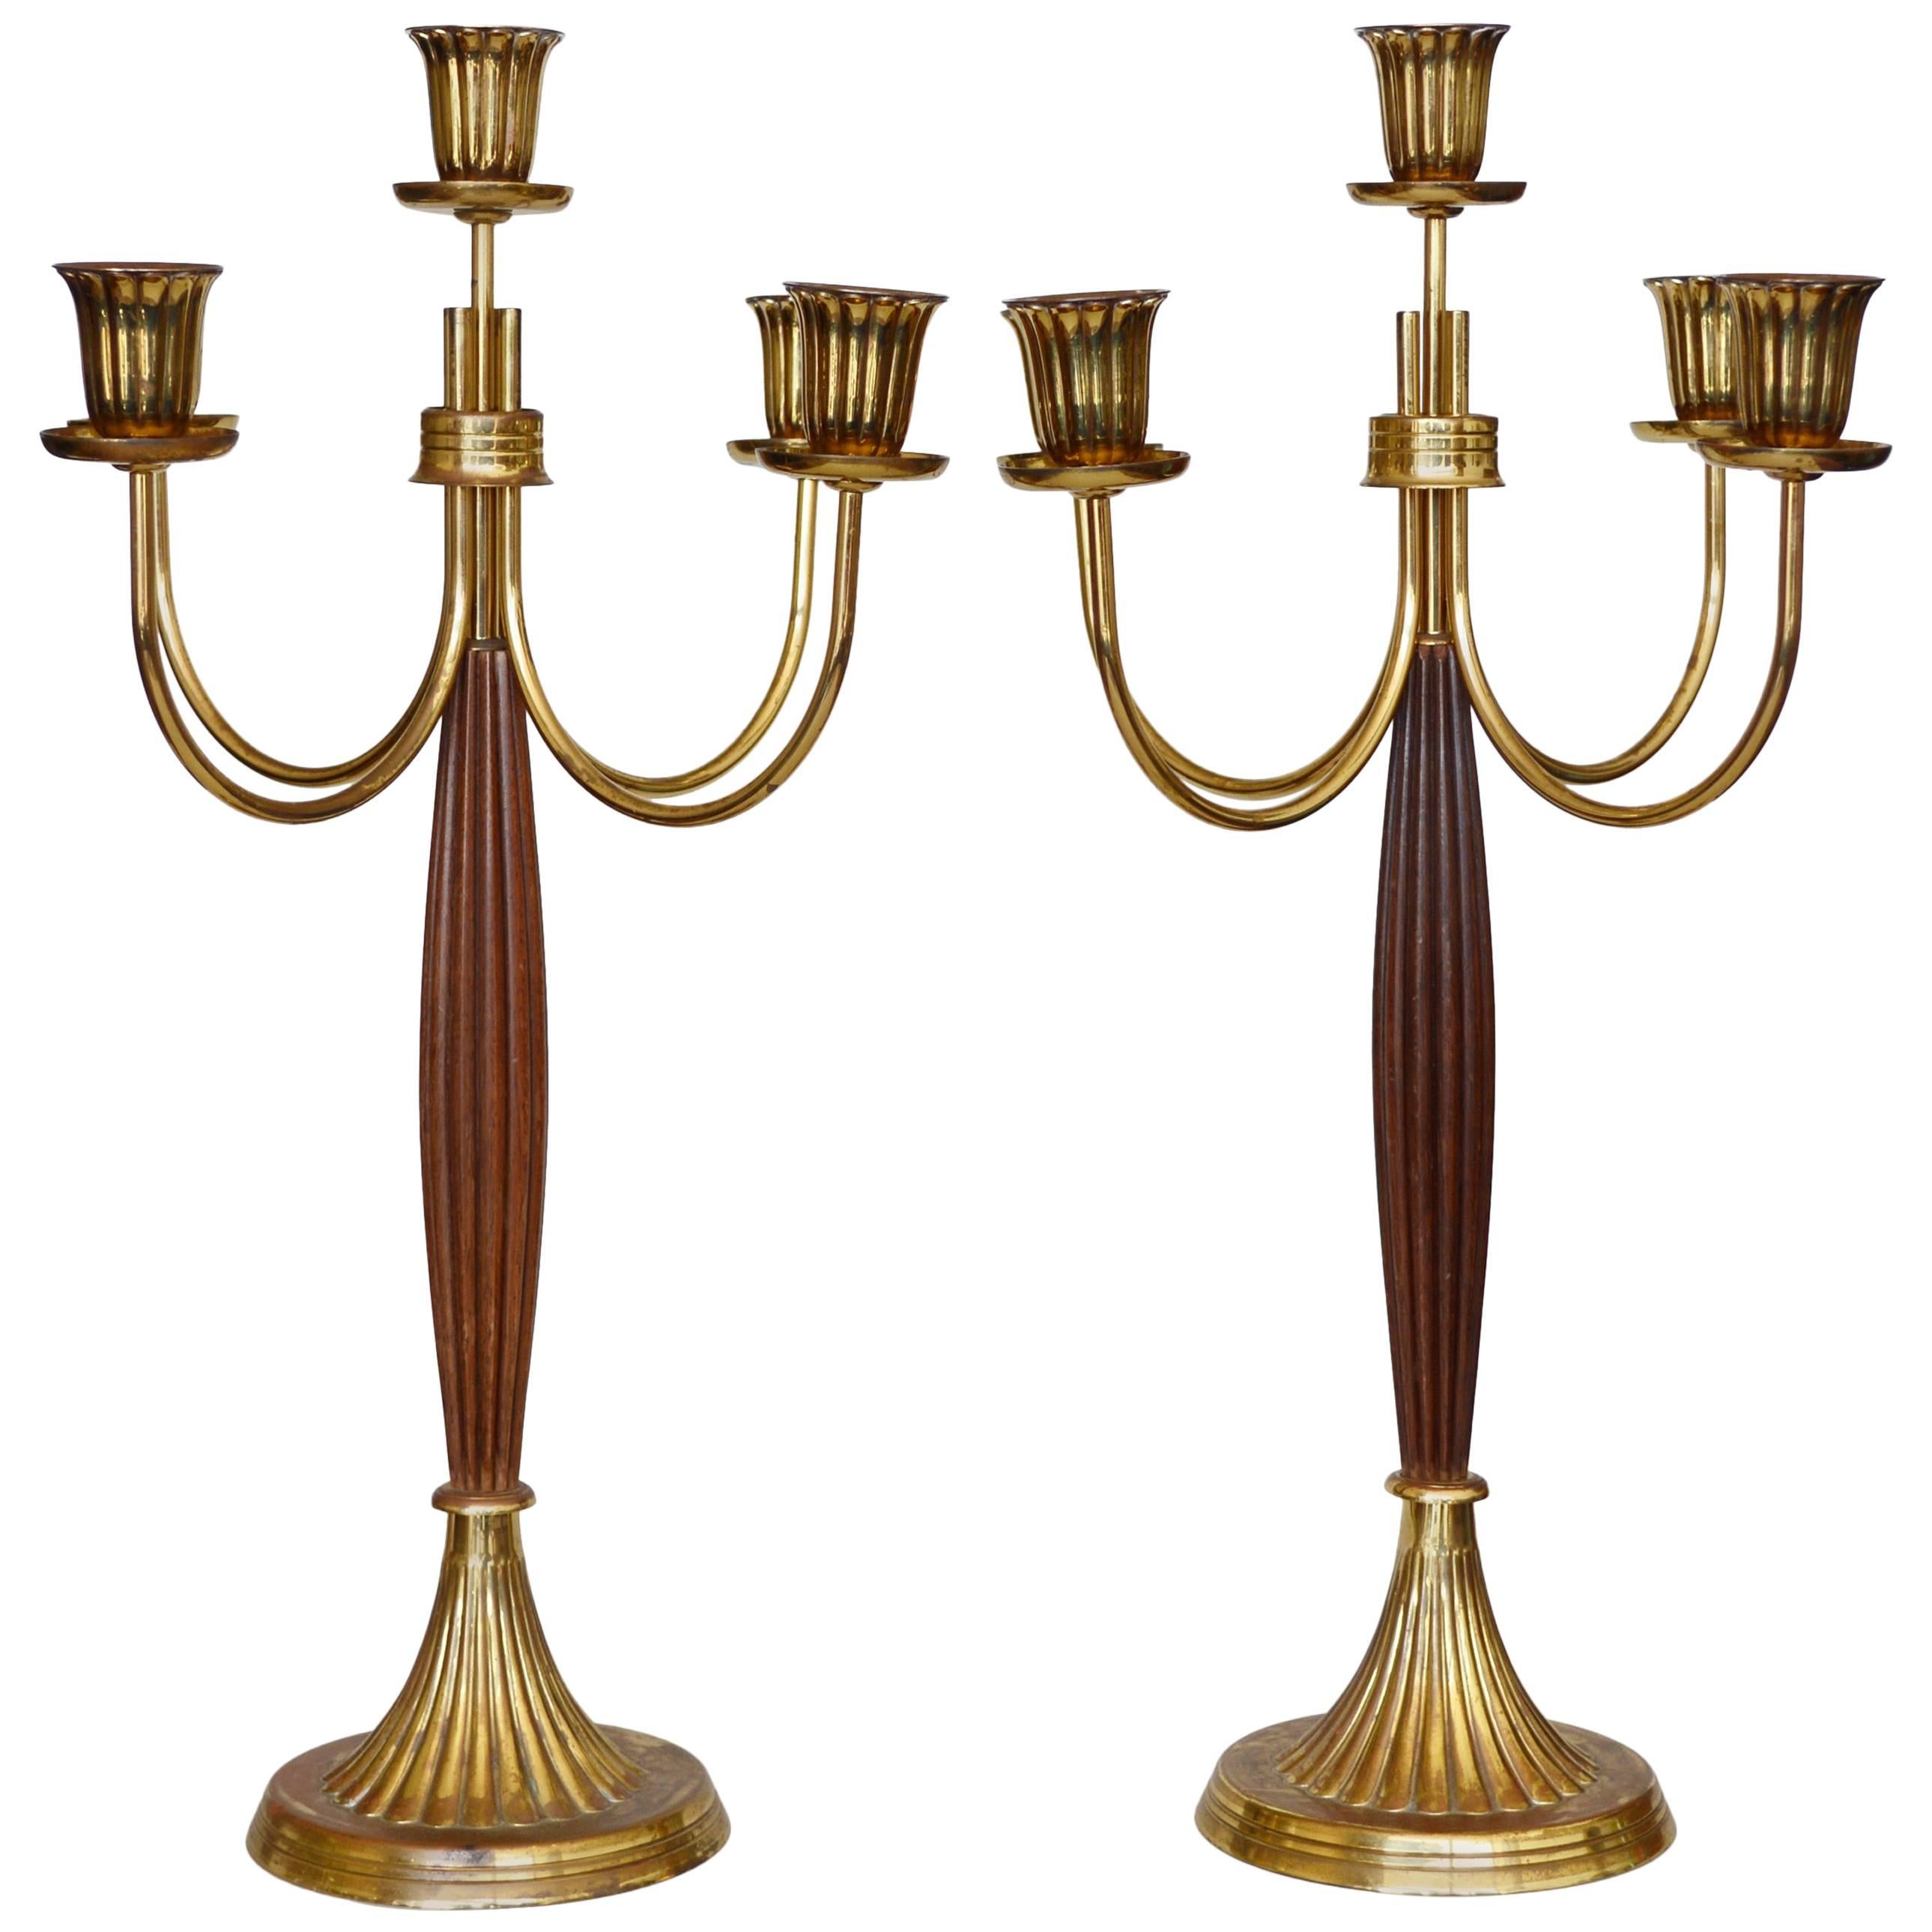 Dorlyn Silversmith Candelabras Attributed to Tommi Parzinger